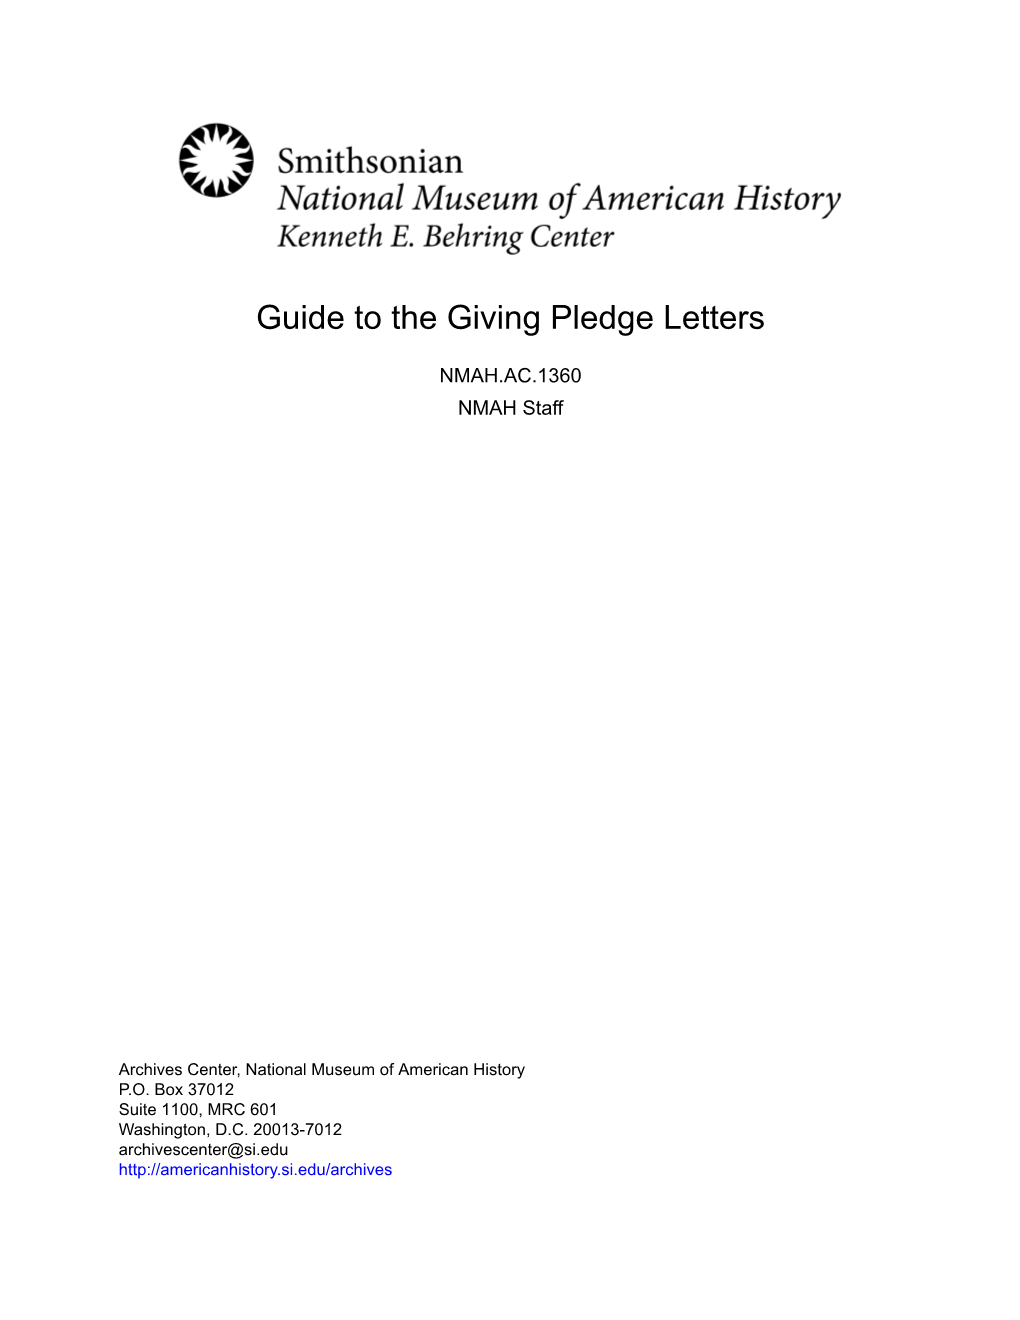 Guide to the Giving Pledge Letters